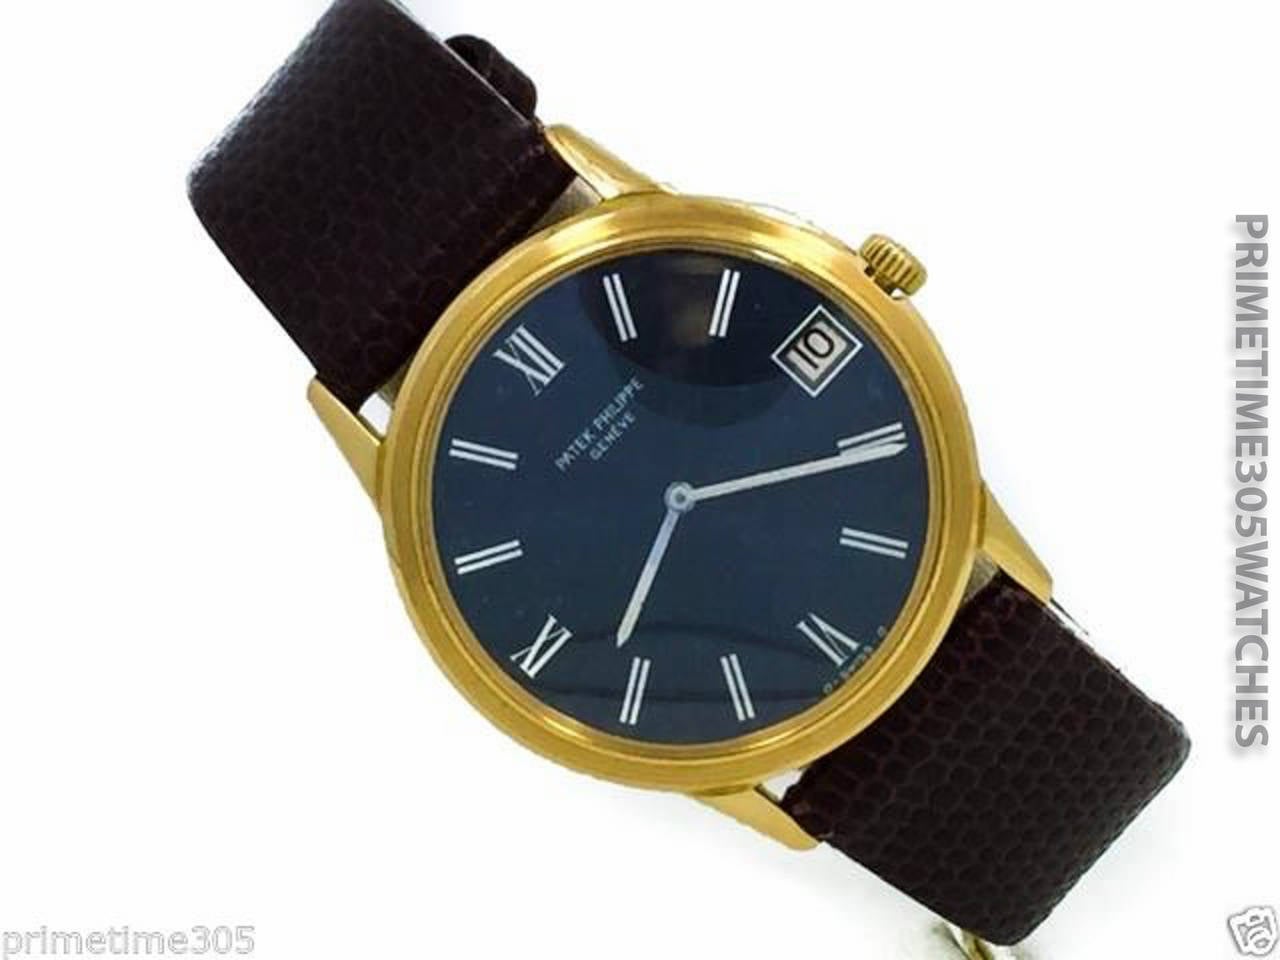 Mens Patek Philippe Calatrava Automatic Winding 18k Yellow Gold Watch W/ Date, Ref 3593. The Watch is in Good Condition Though the Dial does have Some Marks, The Watch is Keeping Great Time. The Watch is on a generic strap & buckle.